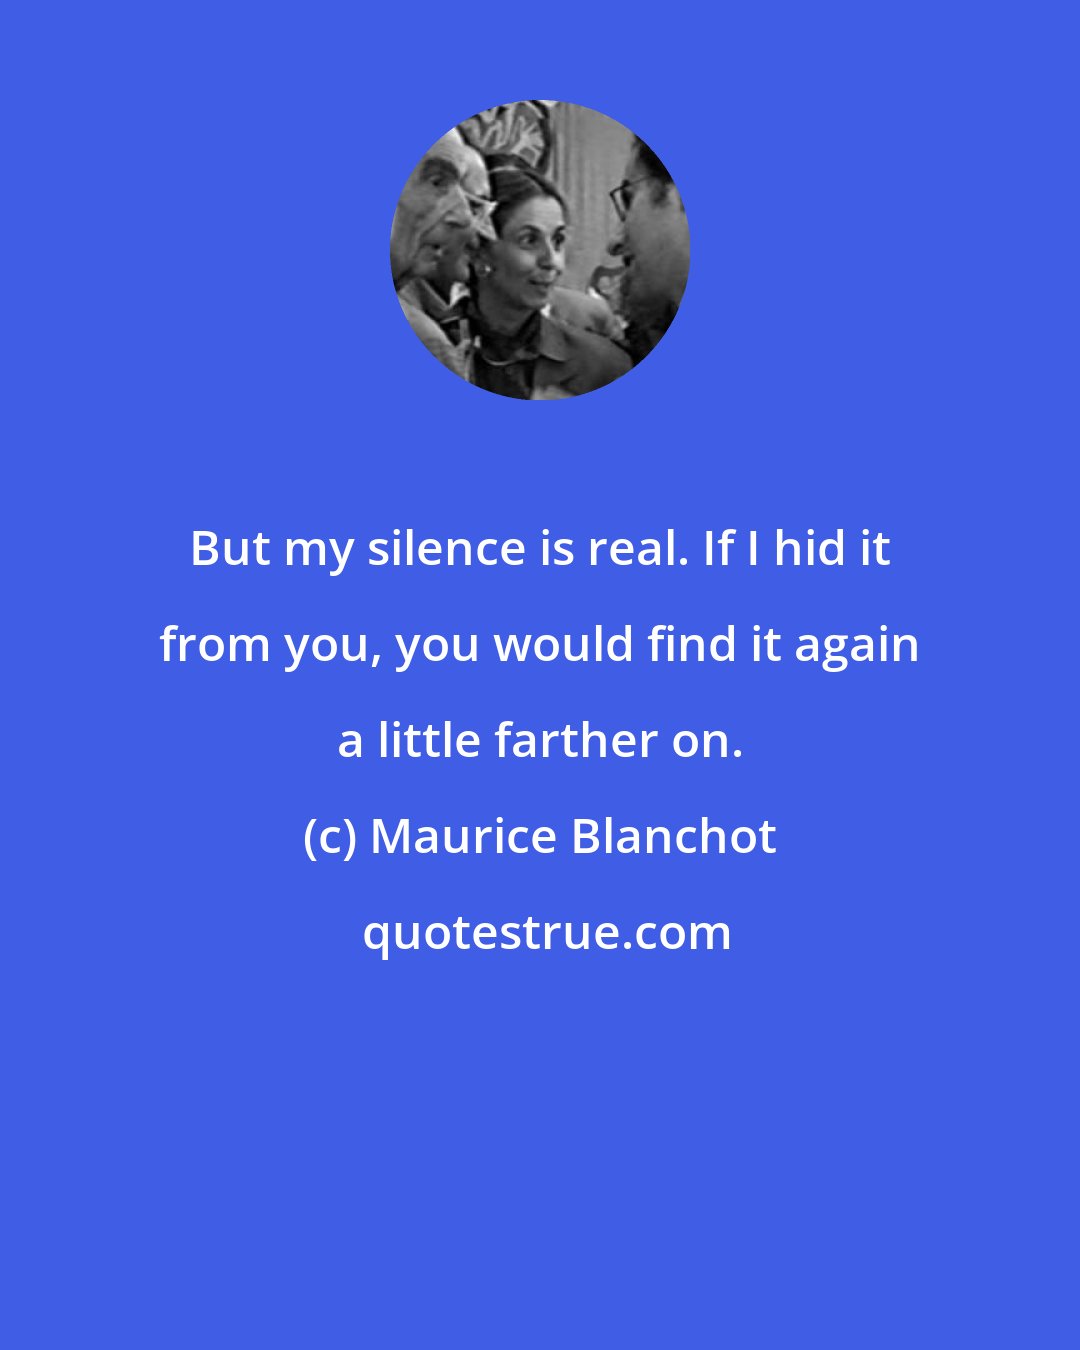 Maurice Blanchot: But my silence is real. If I hid it from you, you would find it again a little farther on.